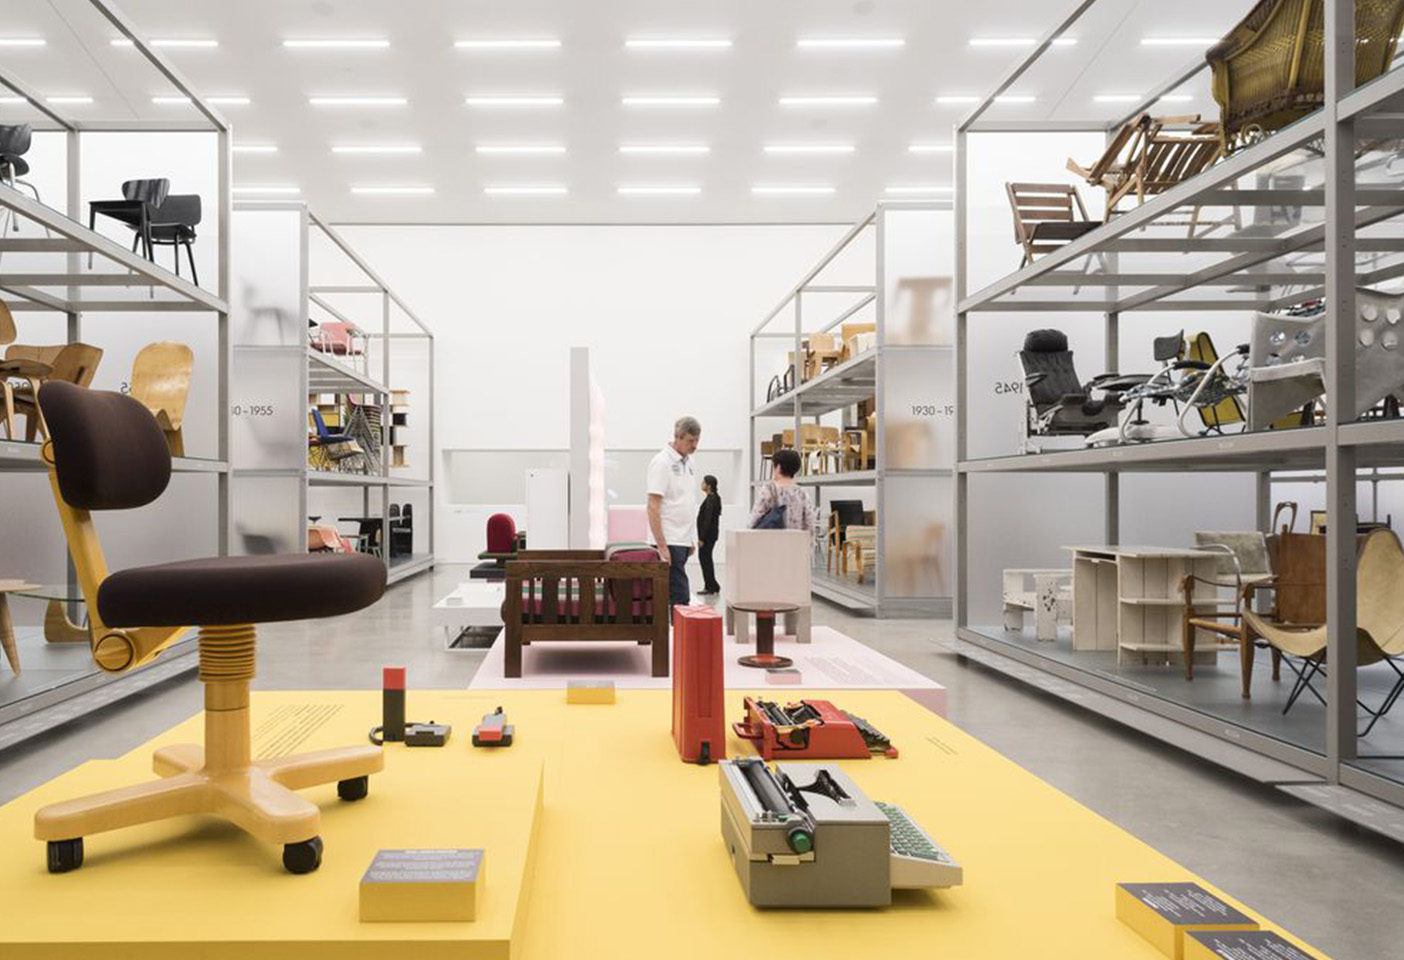  ‘Poet and Rebel: Ettore Sottsass and the Memphis Legacy' exhibition at the Vitra Design Museum. Photo c/o Vitra. 